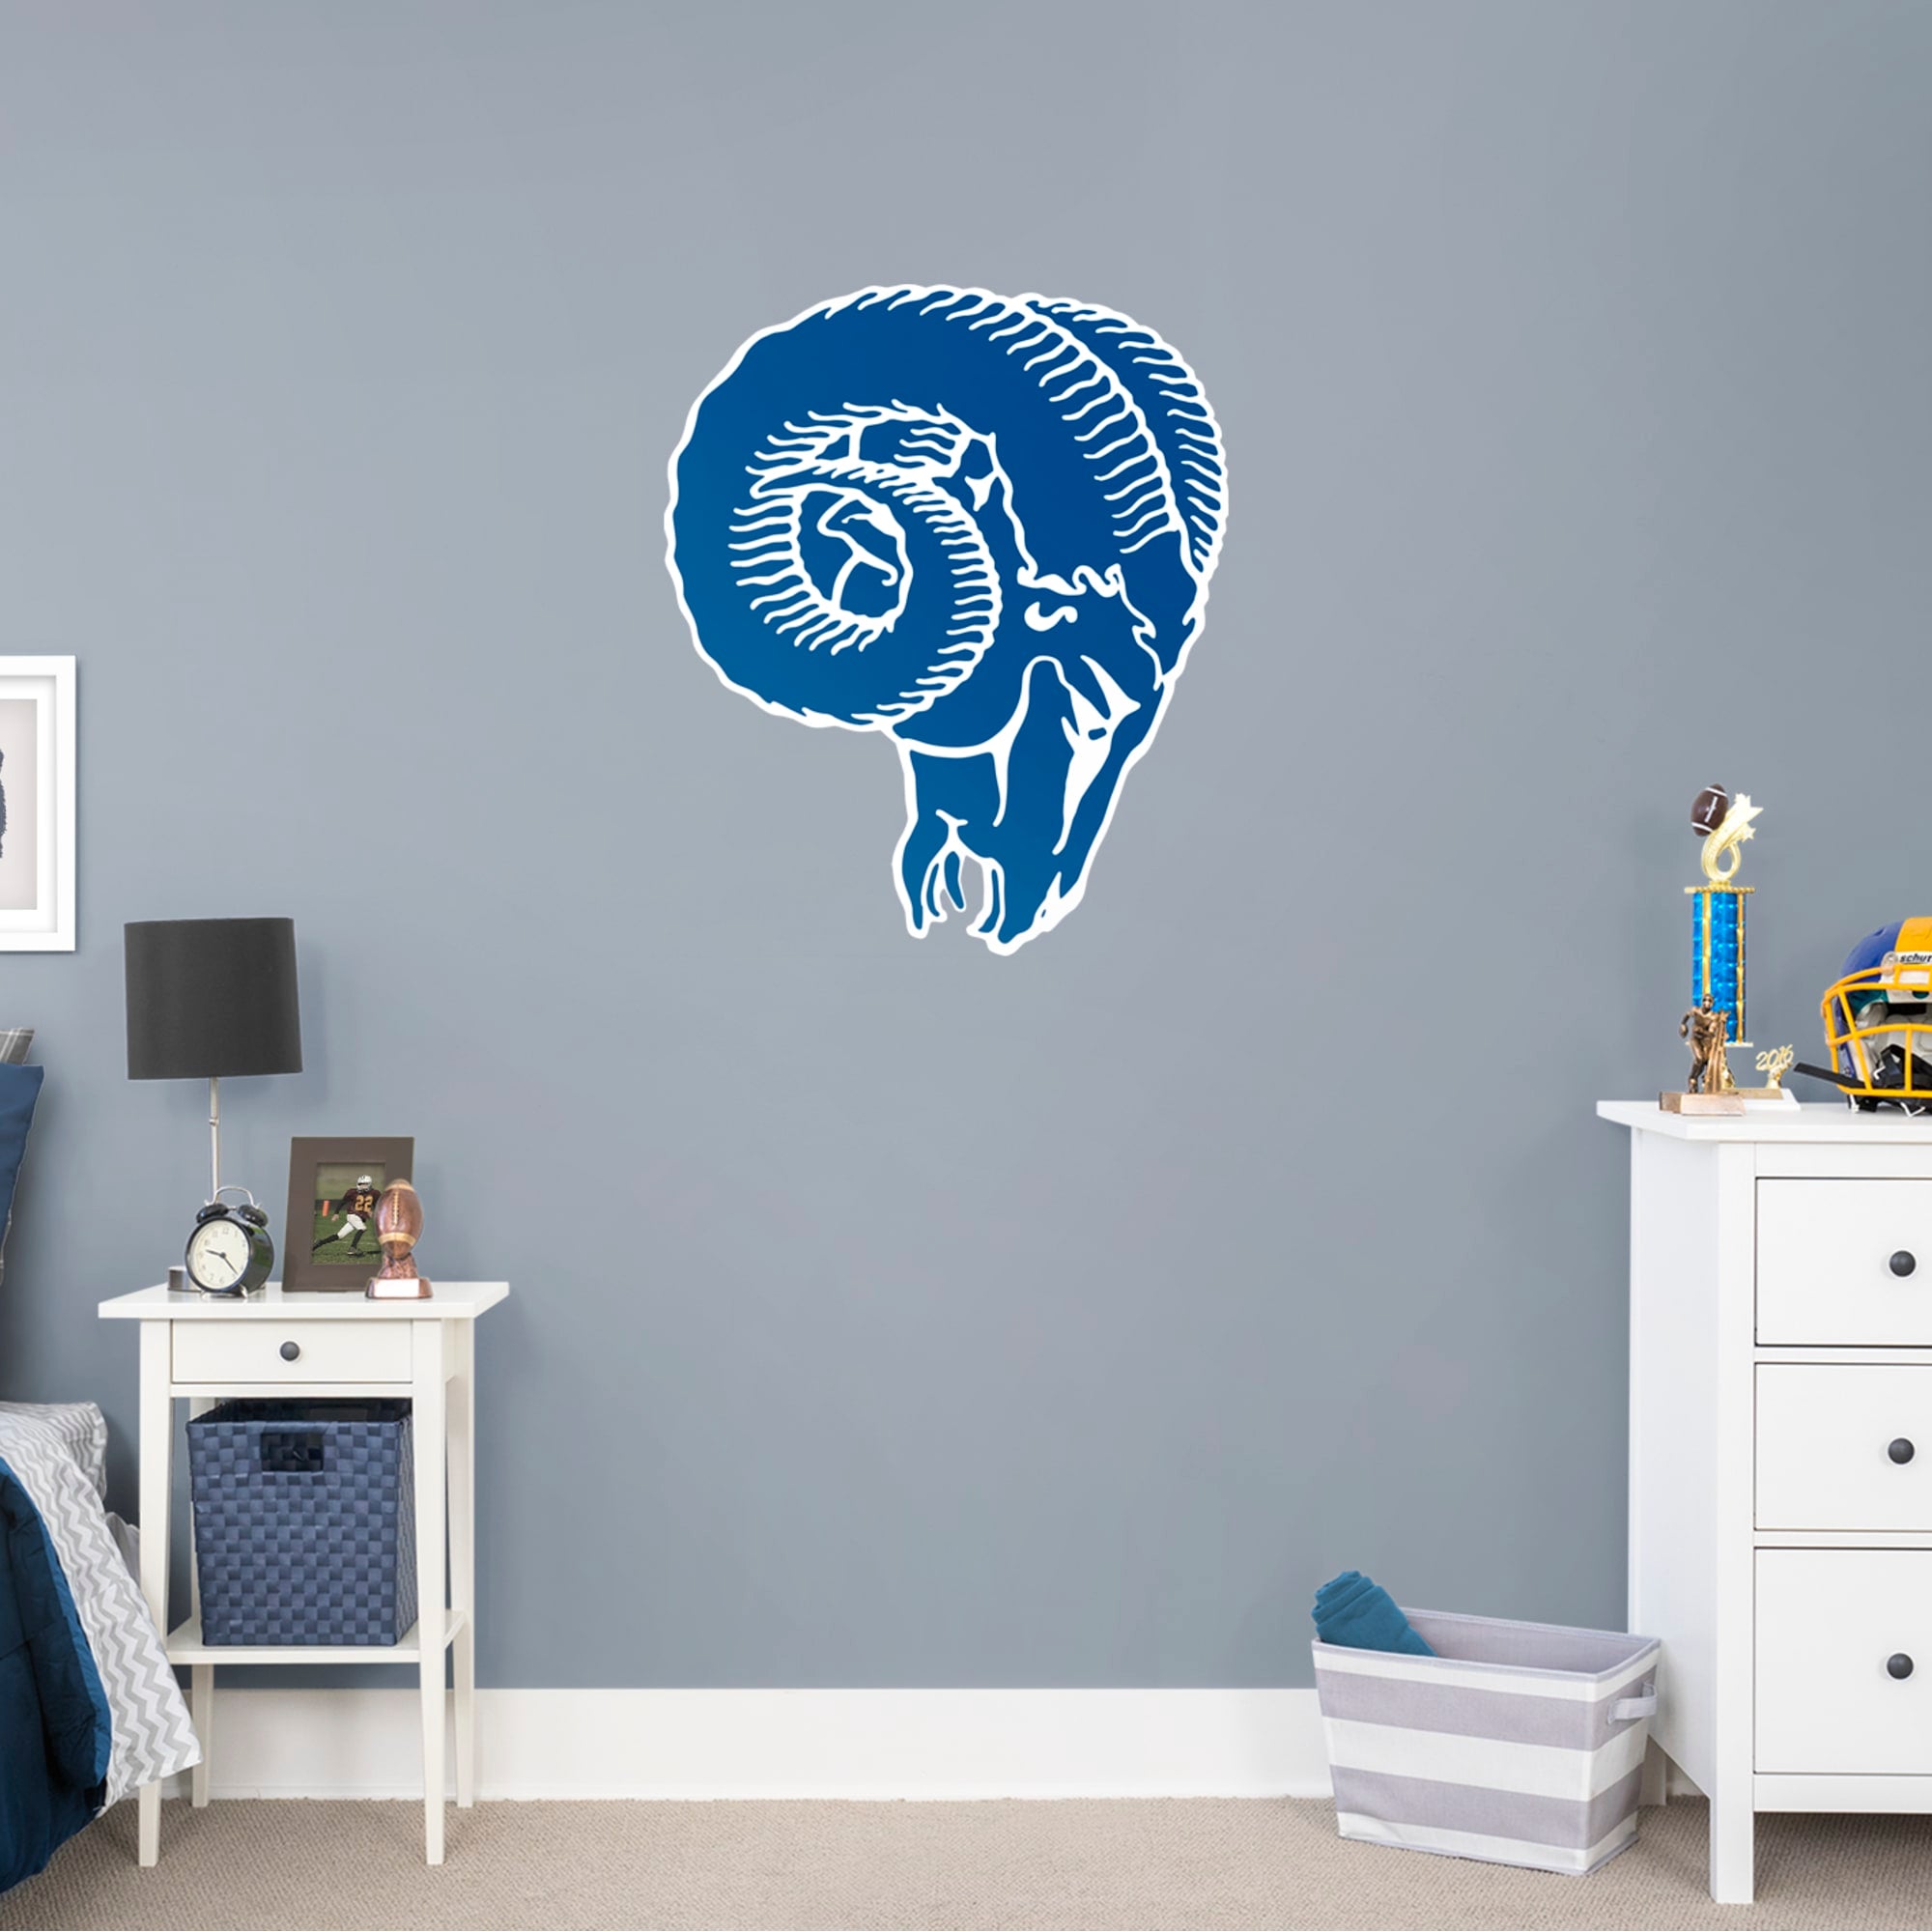 Los Angeles Rams: Classic Logo - Officially Licensed NFL Removable Wall Decal 37.0"W x 45.0"H by Fathead | Vinyl